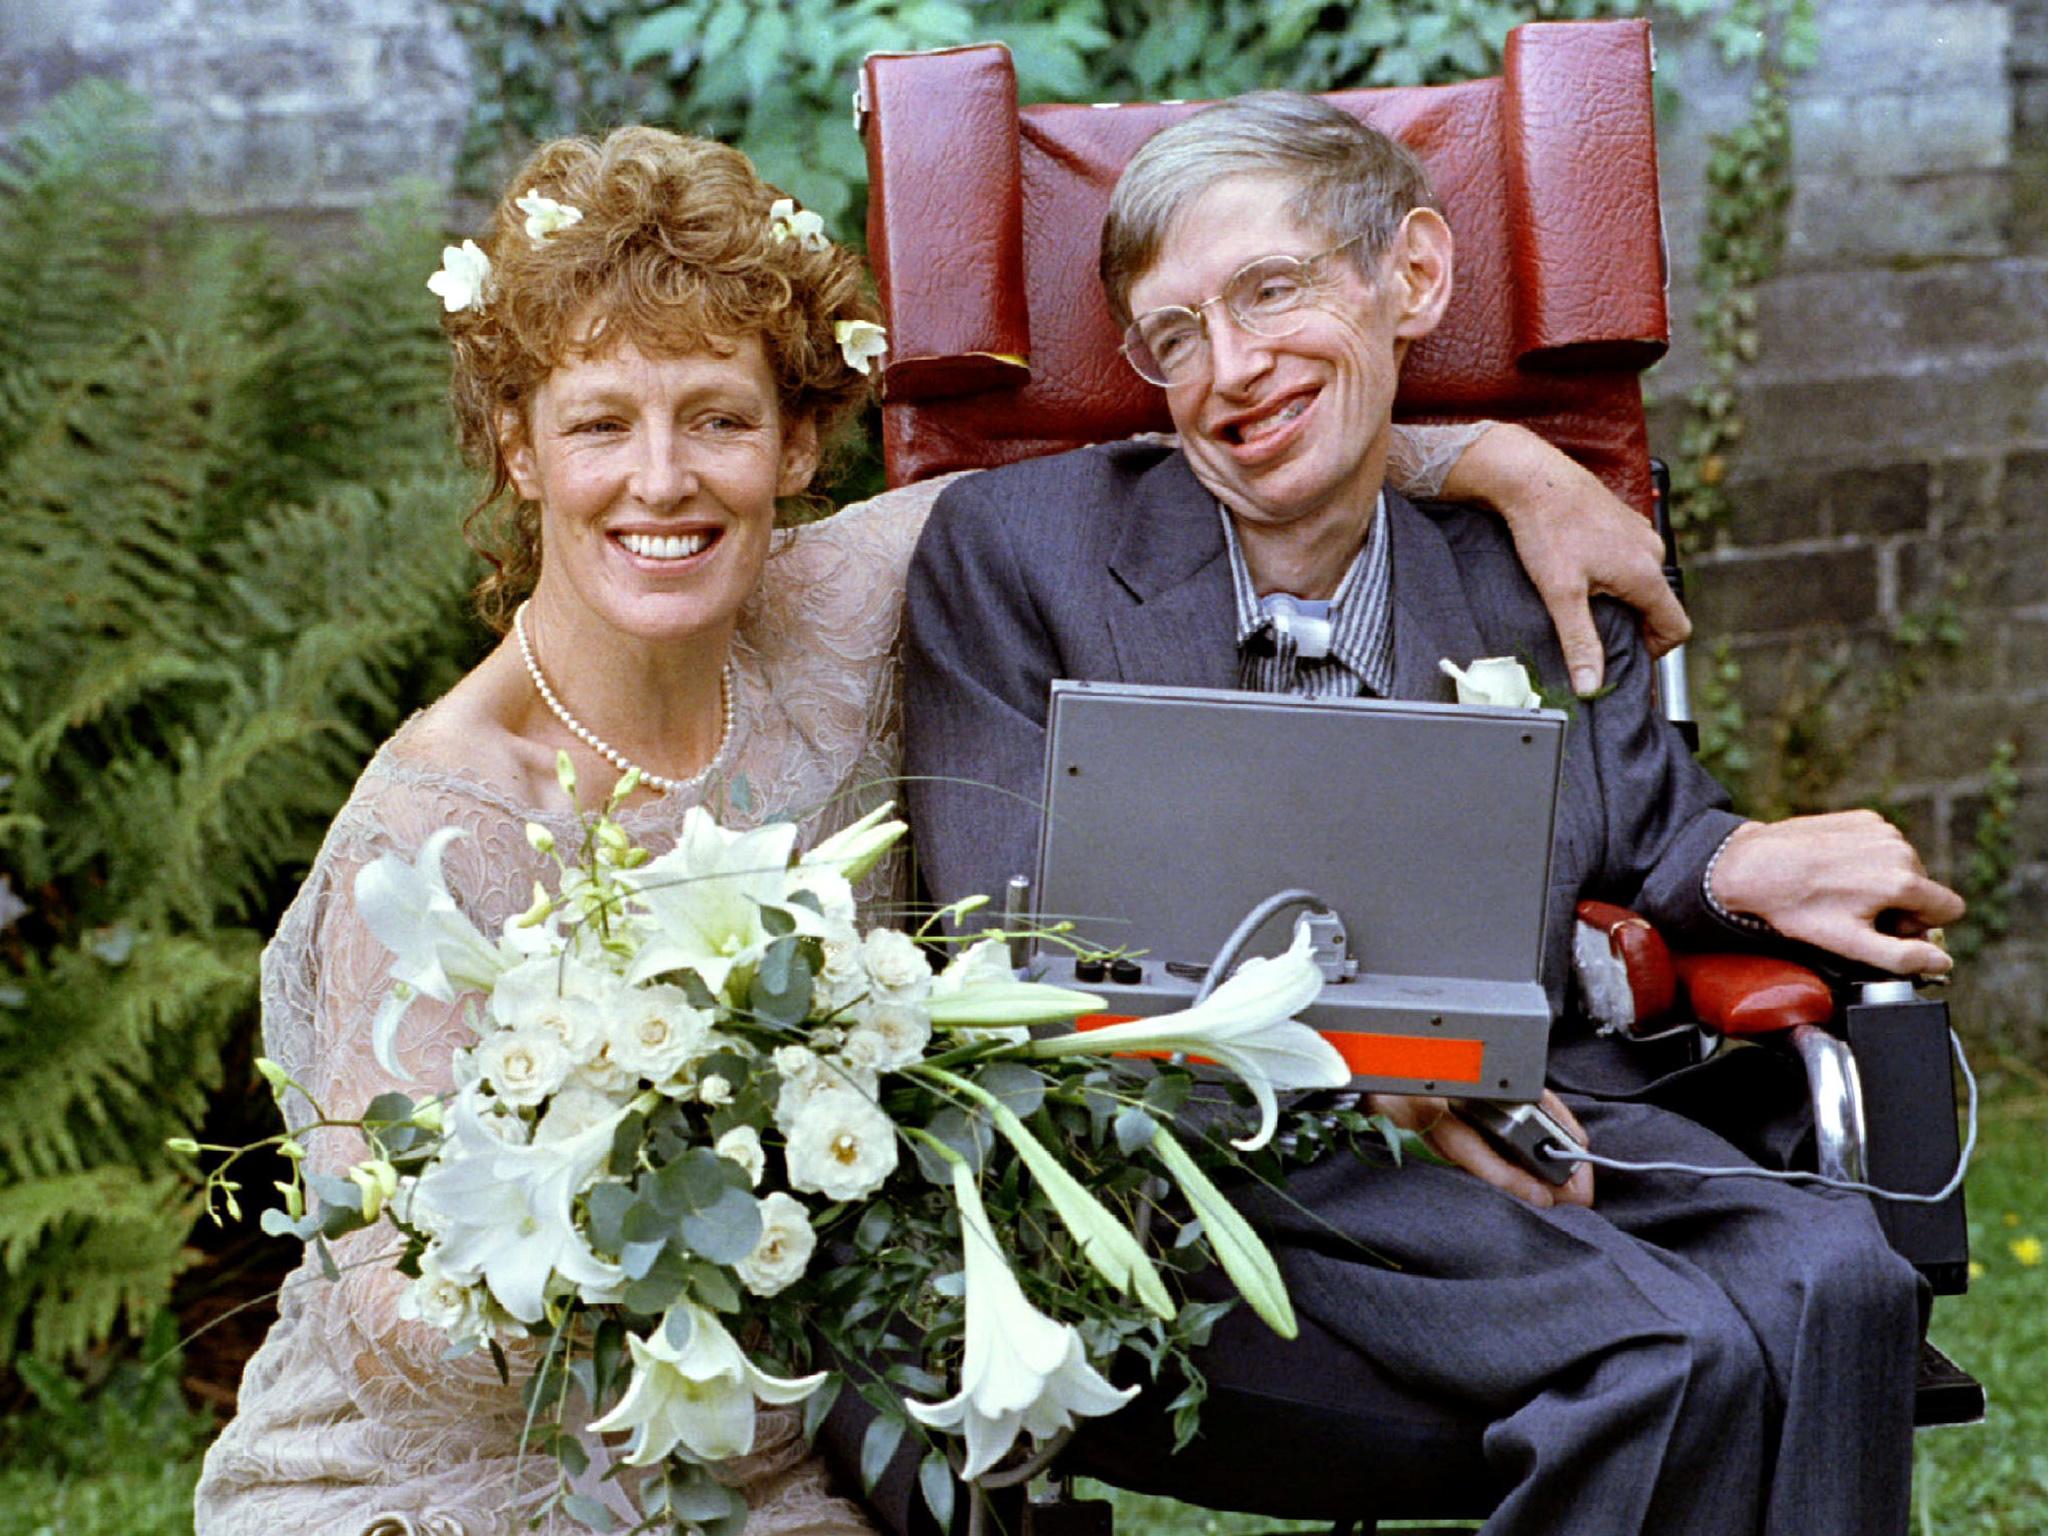 Professor Hawking and his wife Elaine Mason after their wedding in 1995 (REUTERS)